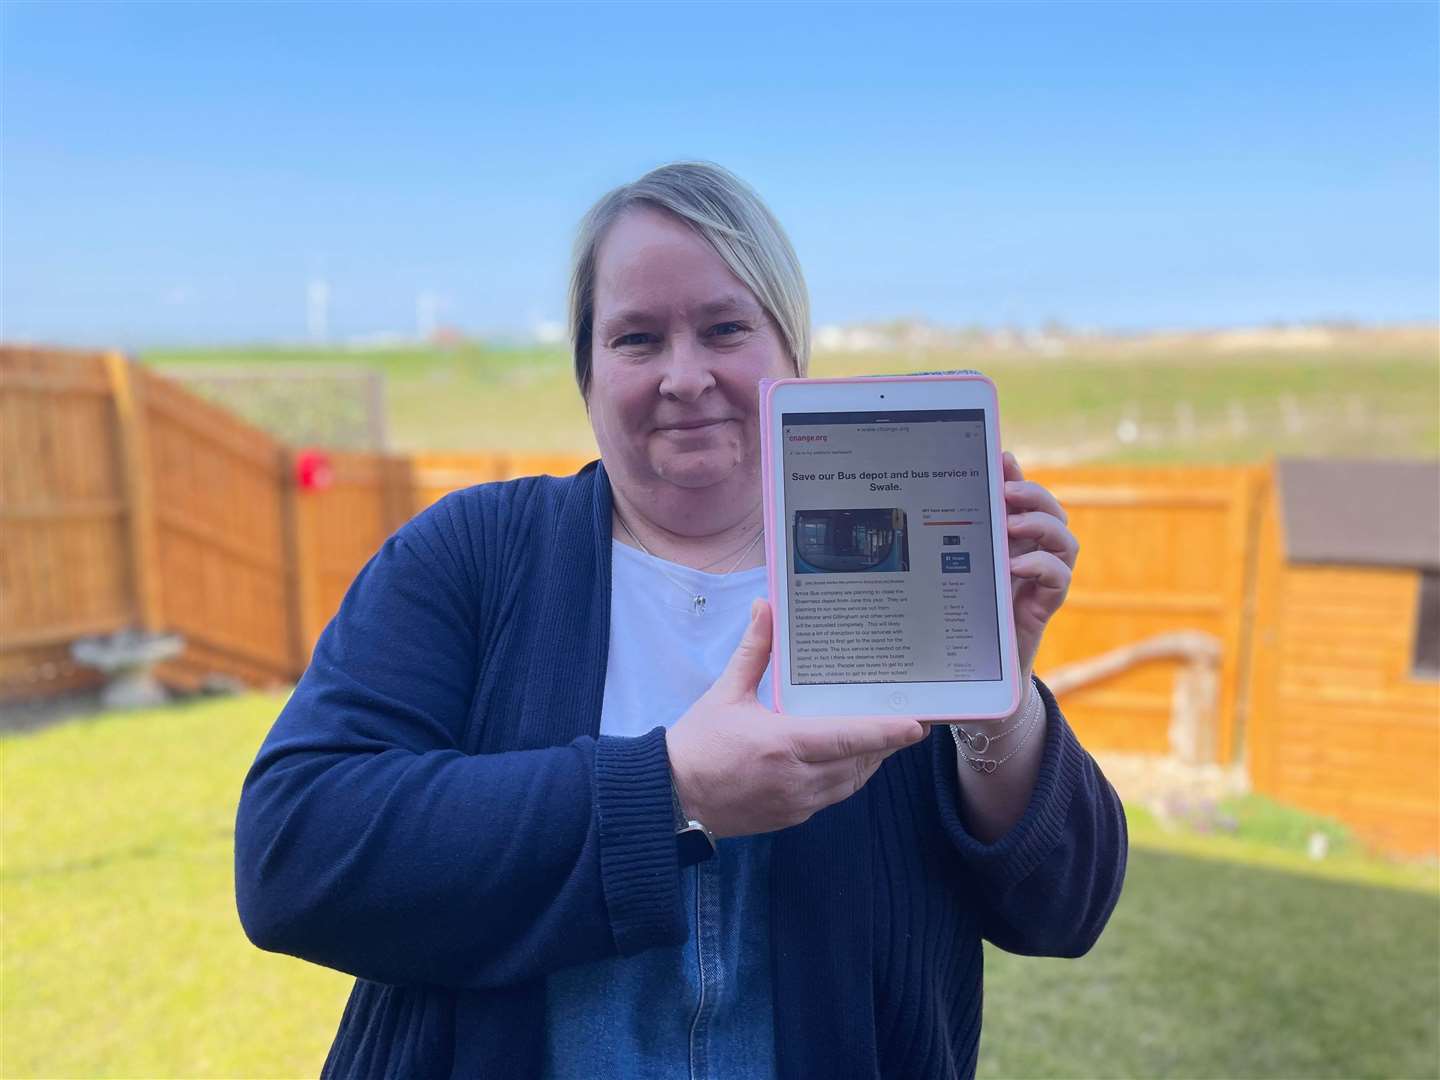 Julie Hursell, from Queenborough, has started an online petition